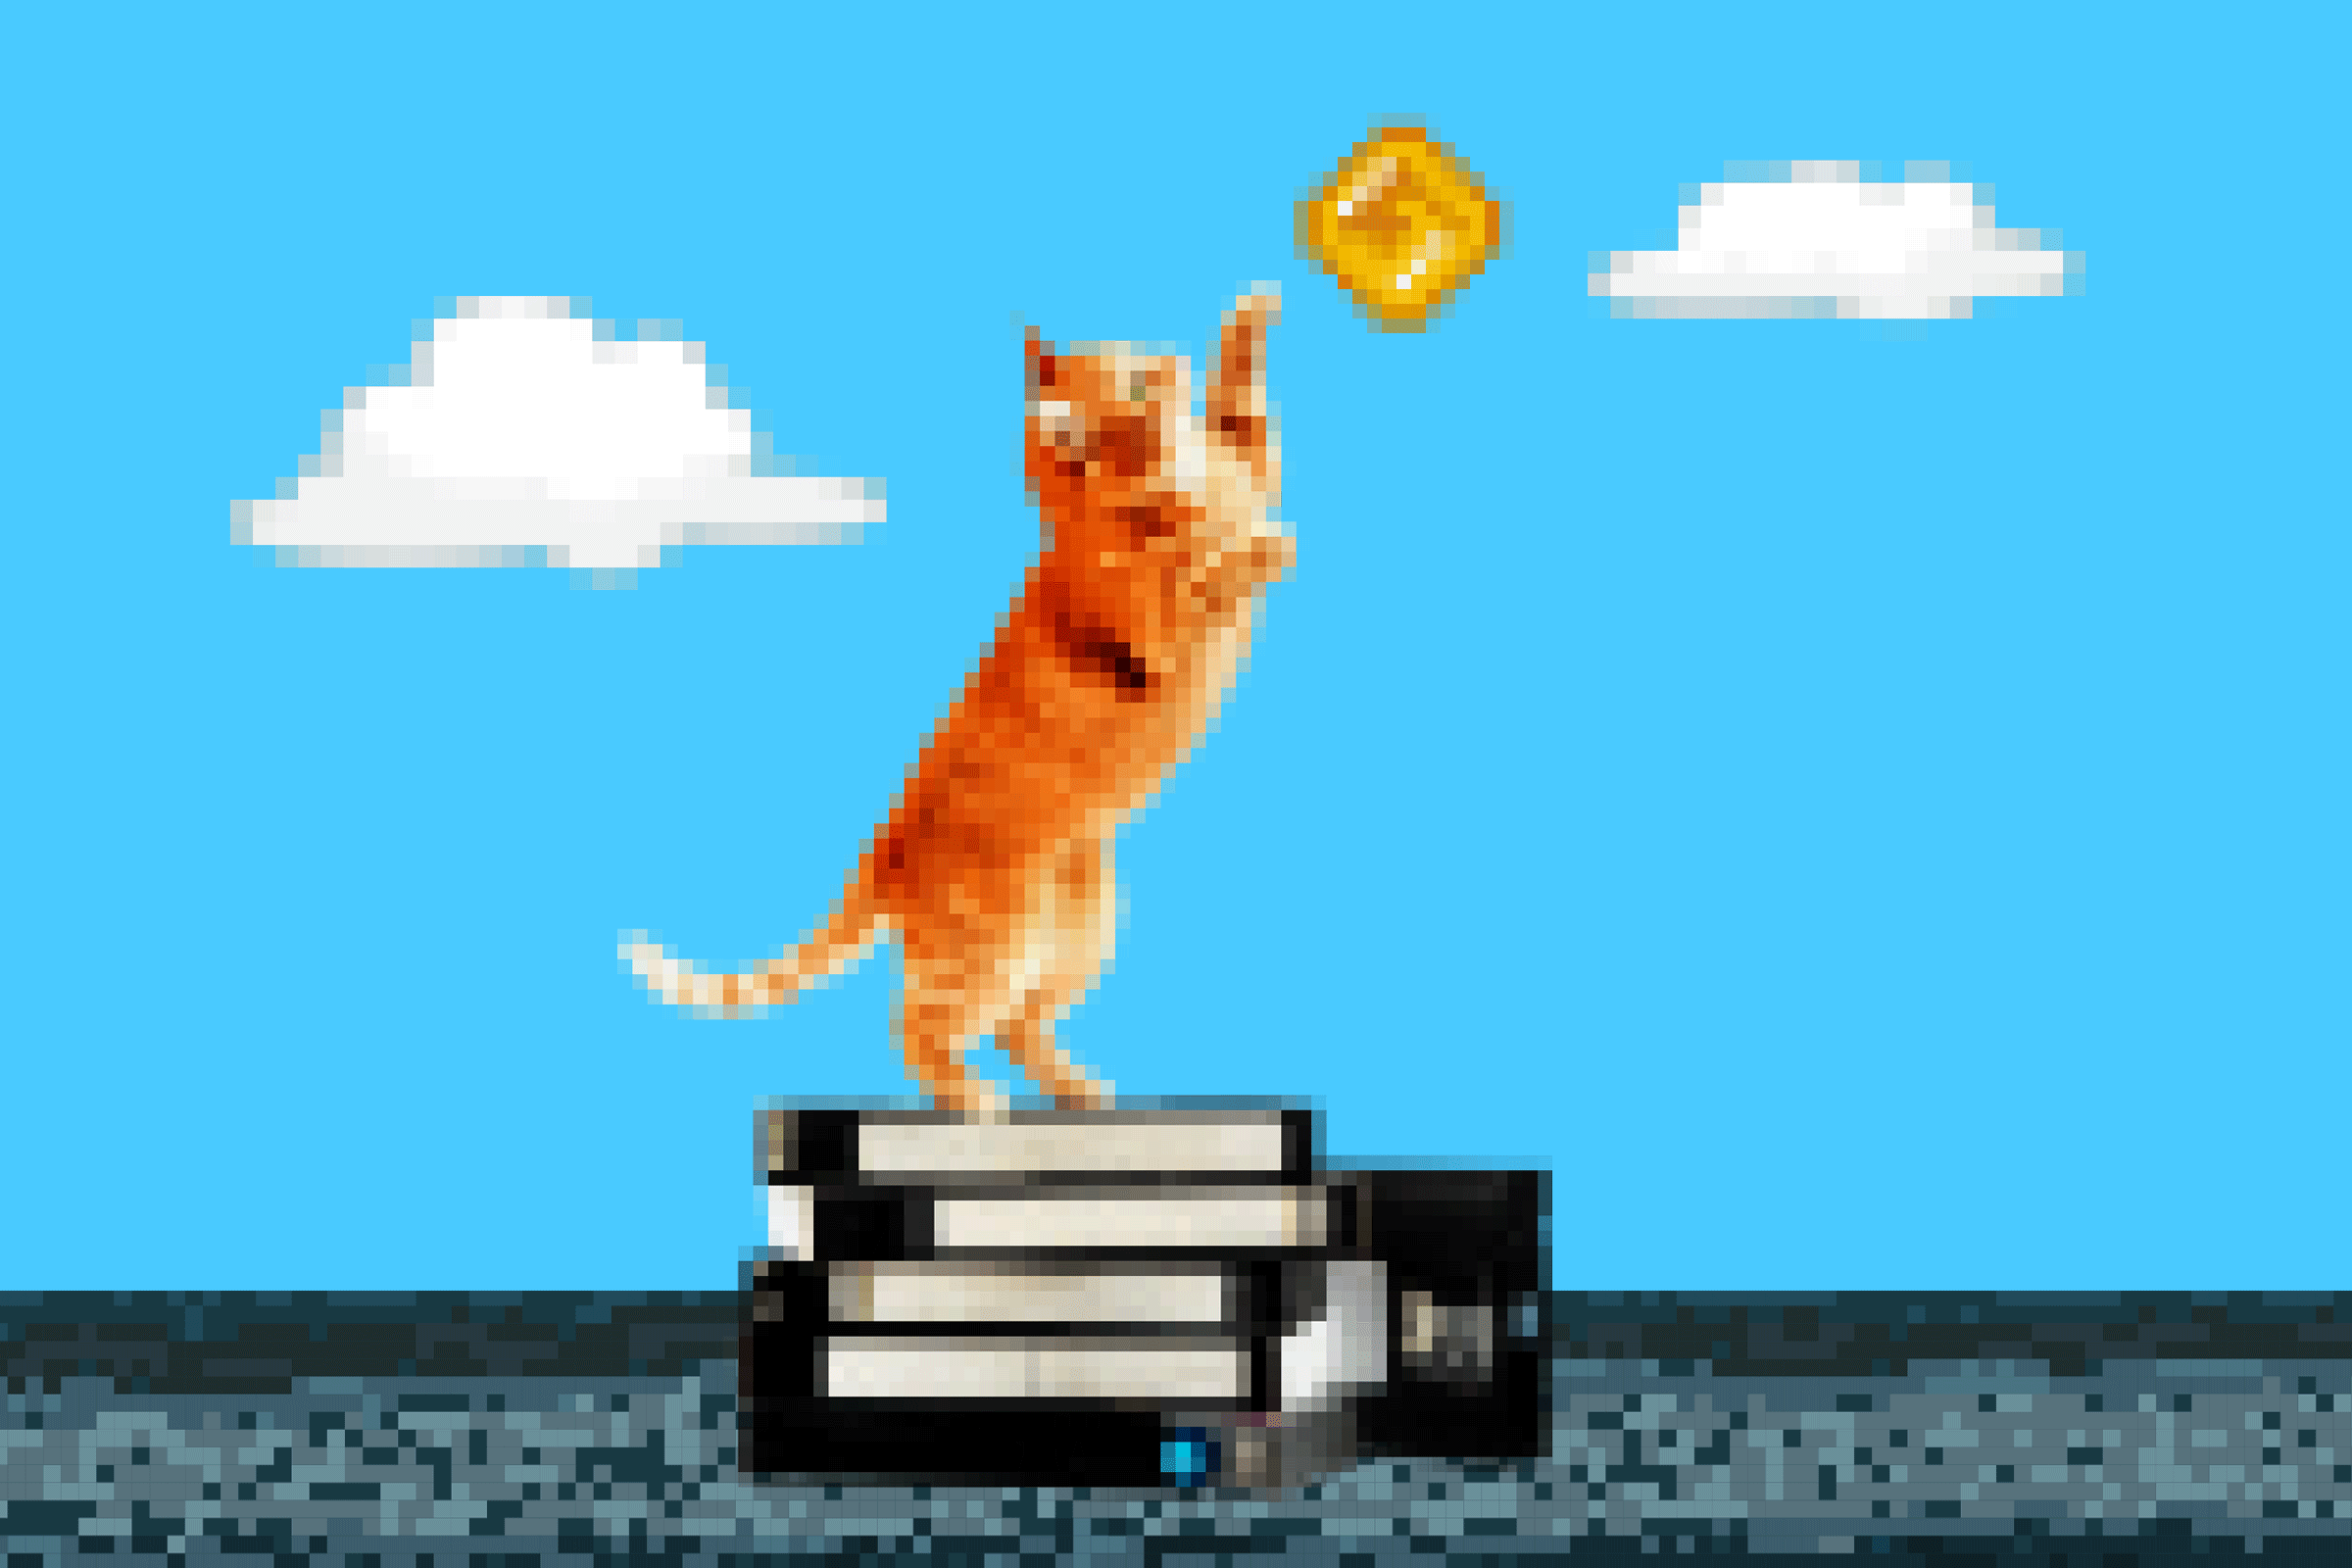 Cat playing in video game